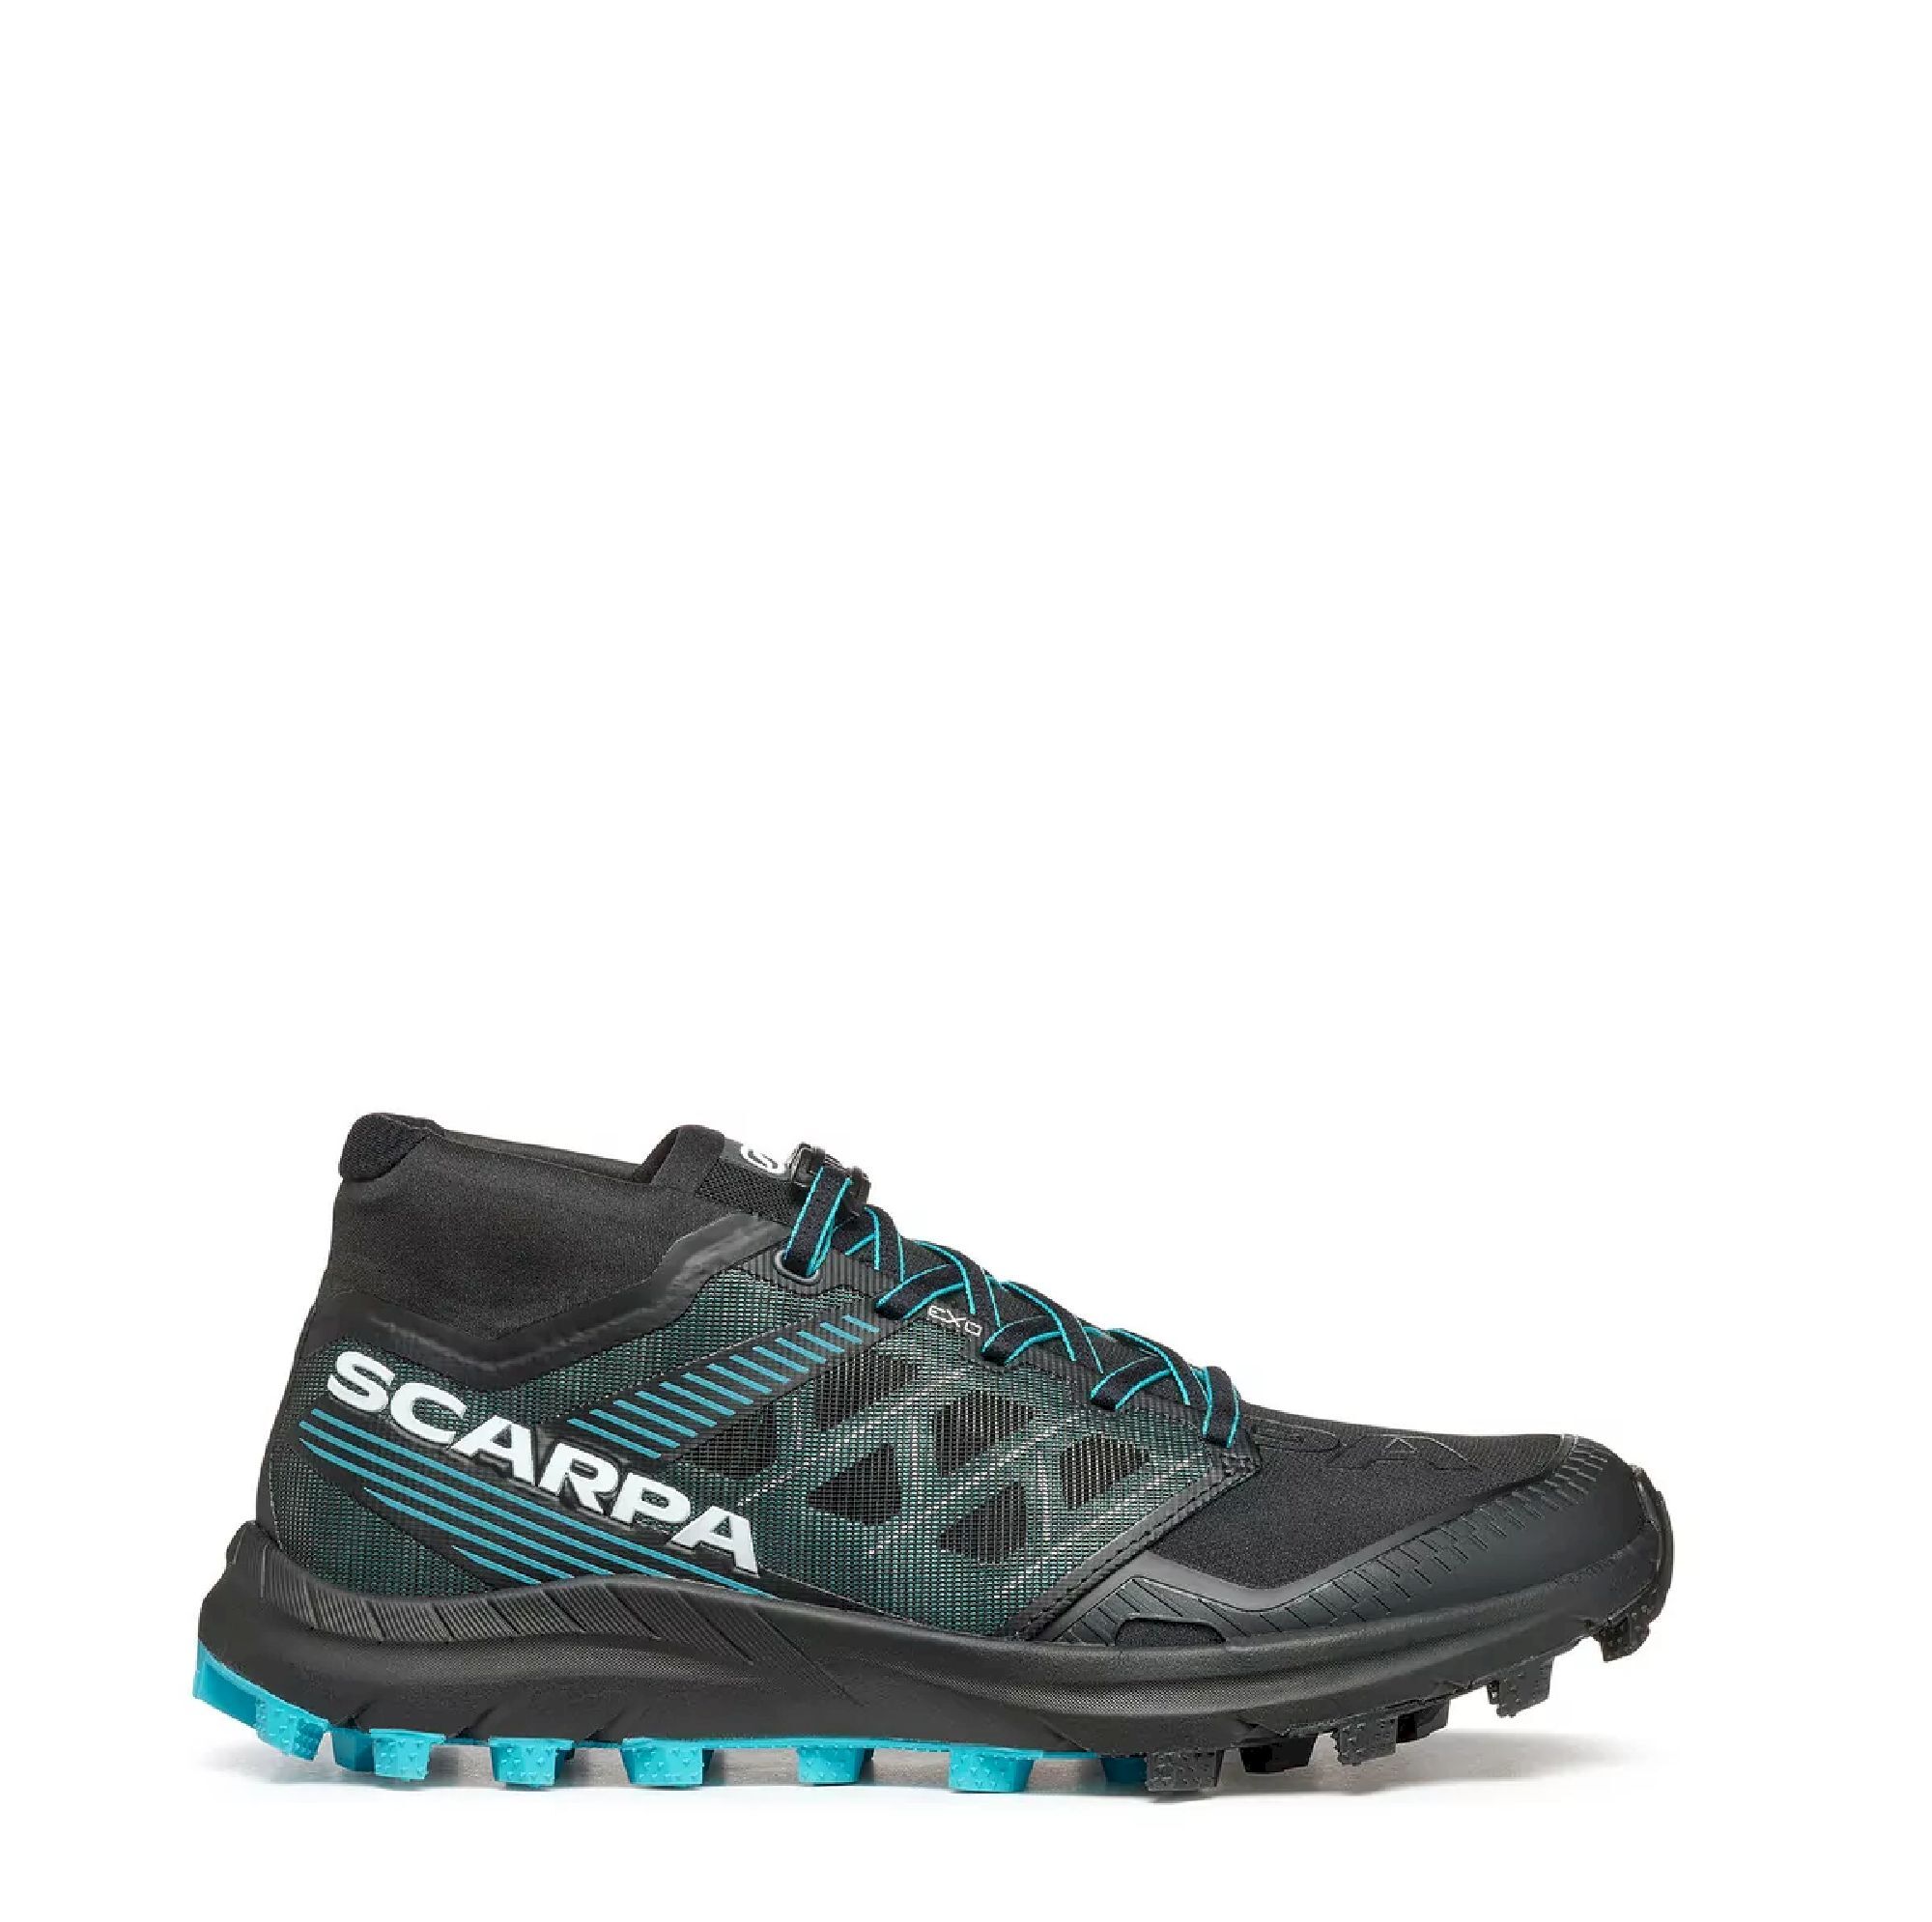 Scarpa Spin ST Wmn - Trail running shoes - Women's | Hardloop